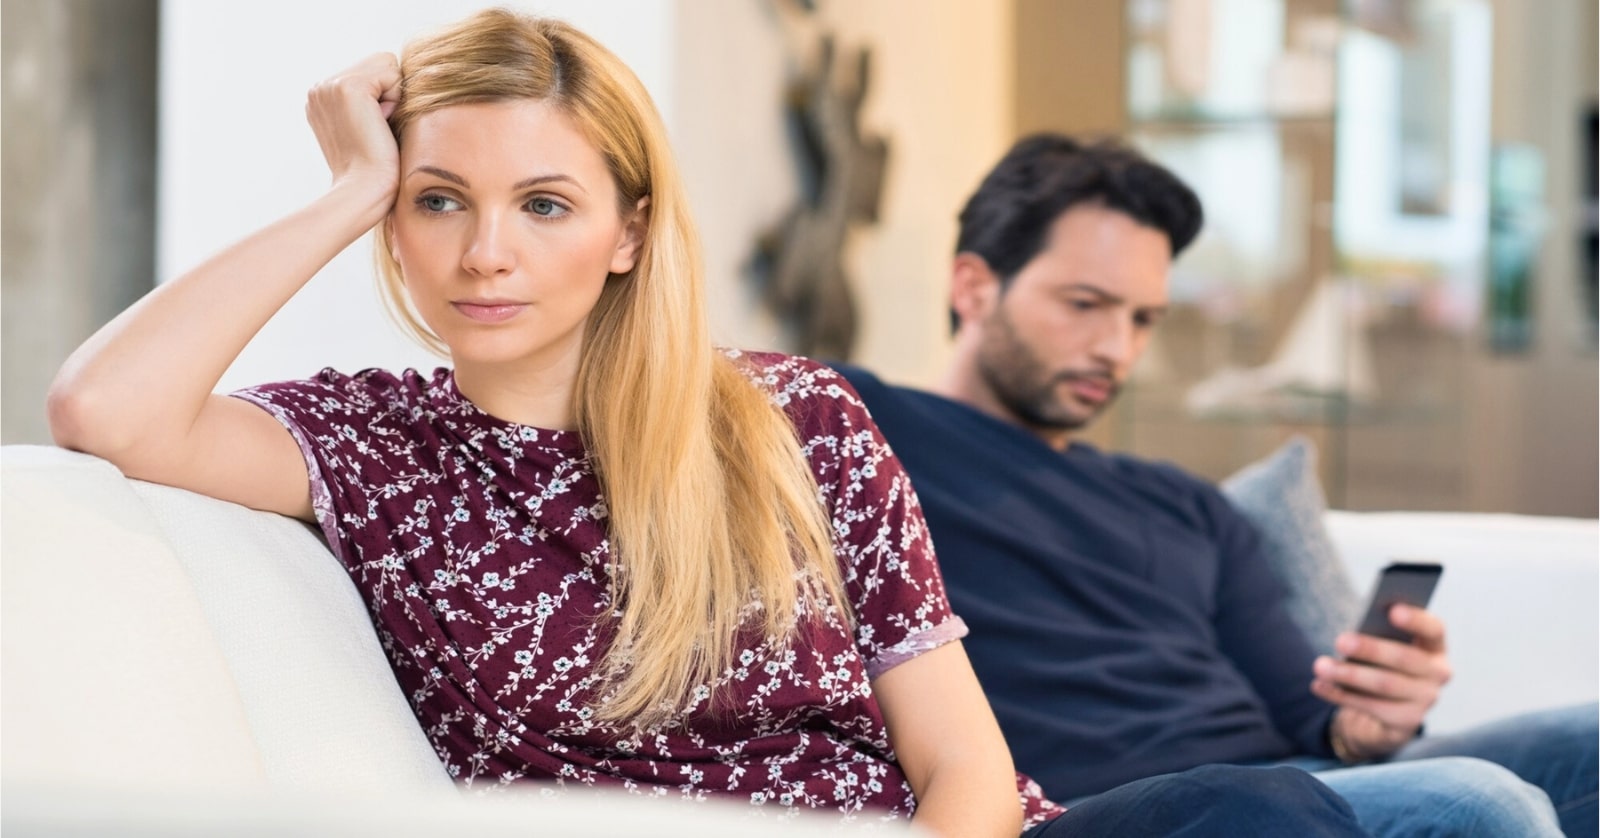 woman looking discontent as her partner looks at his phone on the couch behind her - illustrating incompatibility in a relationship